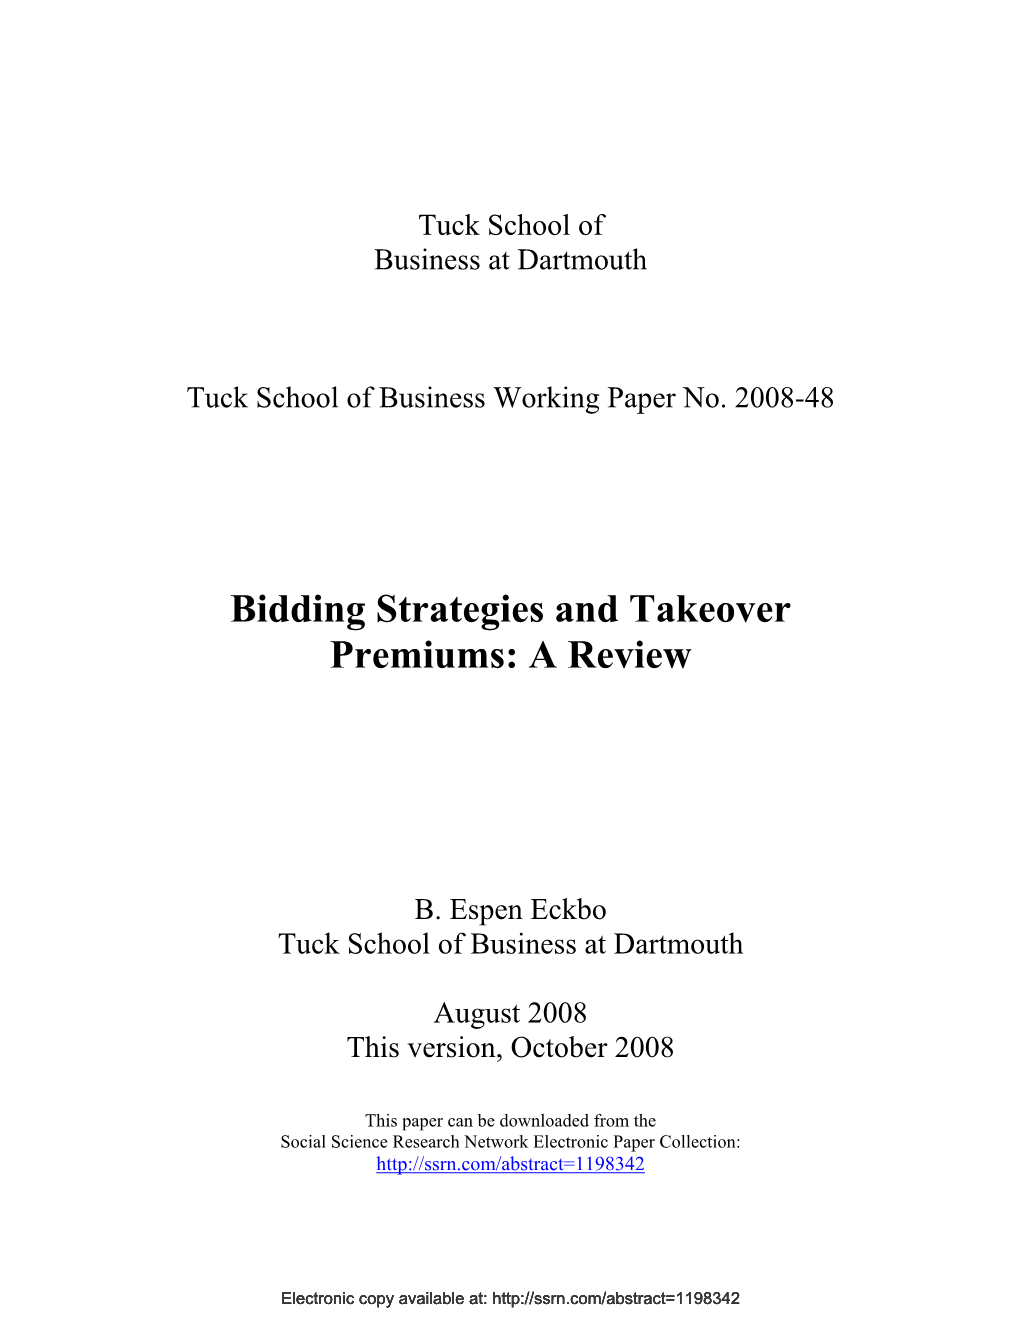 Bidding Strategies and Takeover Premiums: a Review